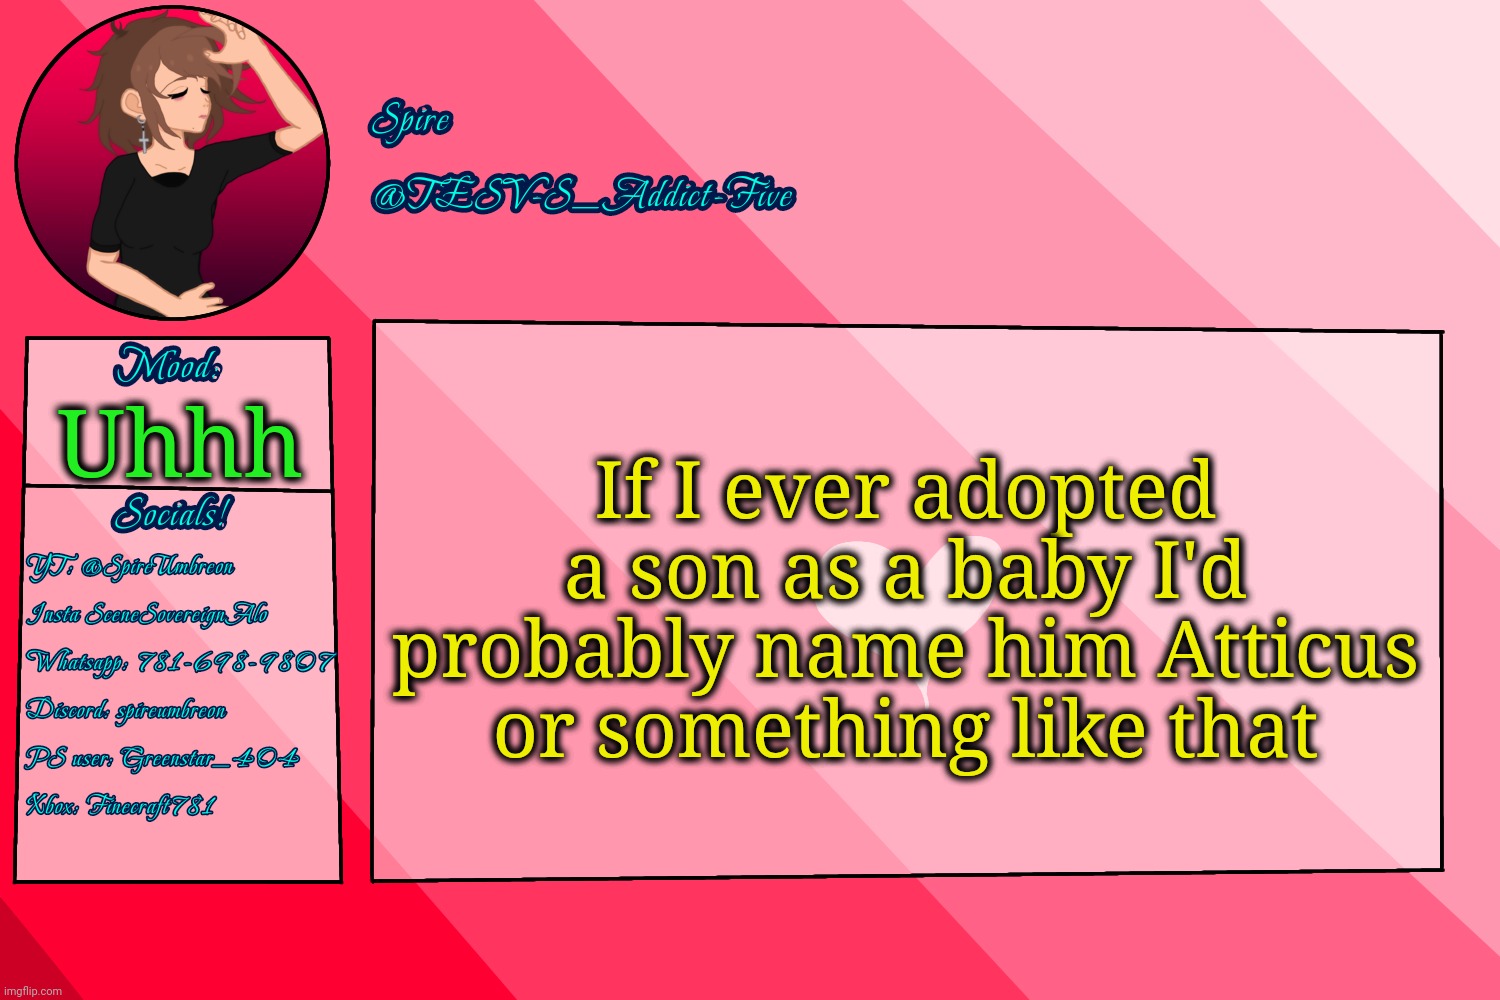 . | If I ever adopted a son as a baby I'd probably name him Atticus or something like that; Uhhh | image tagged in tesv-s_addict-five announcement template | made w/ Imgflip meme maker